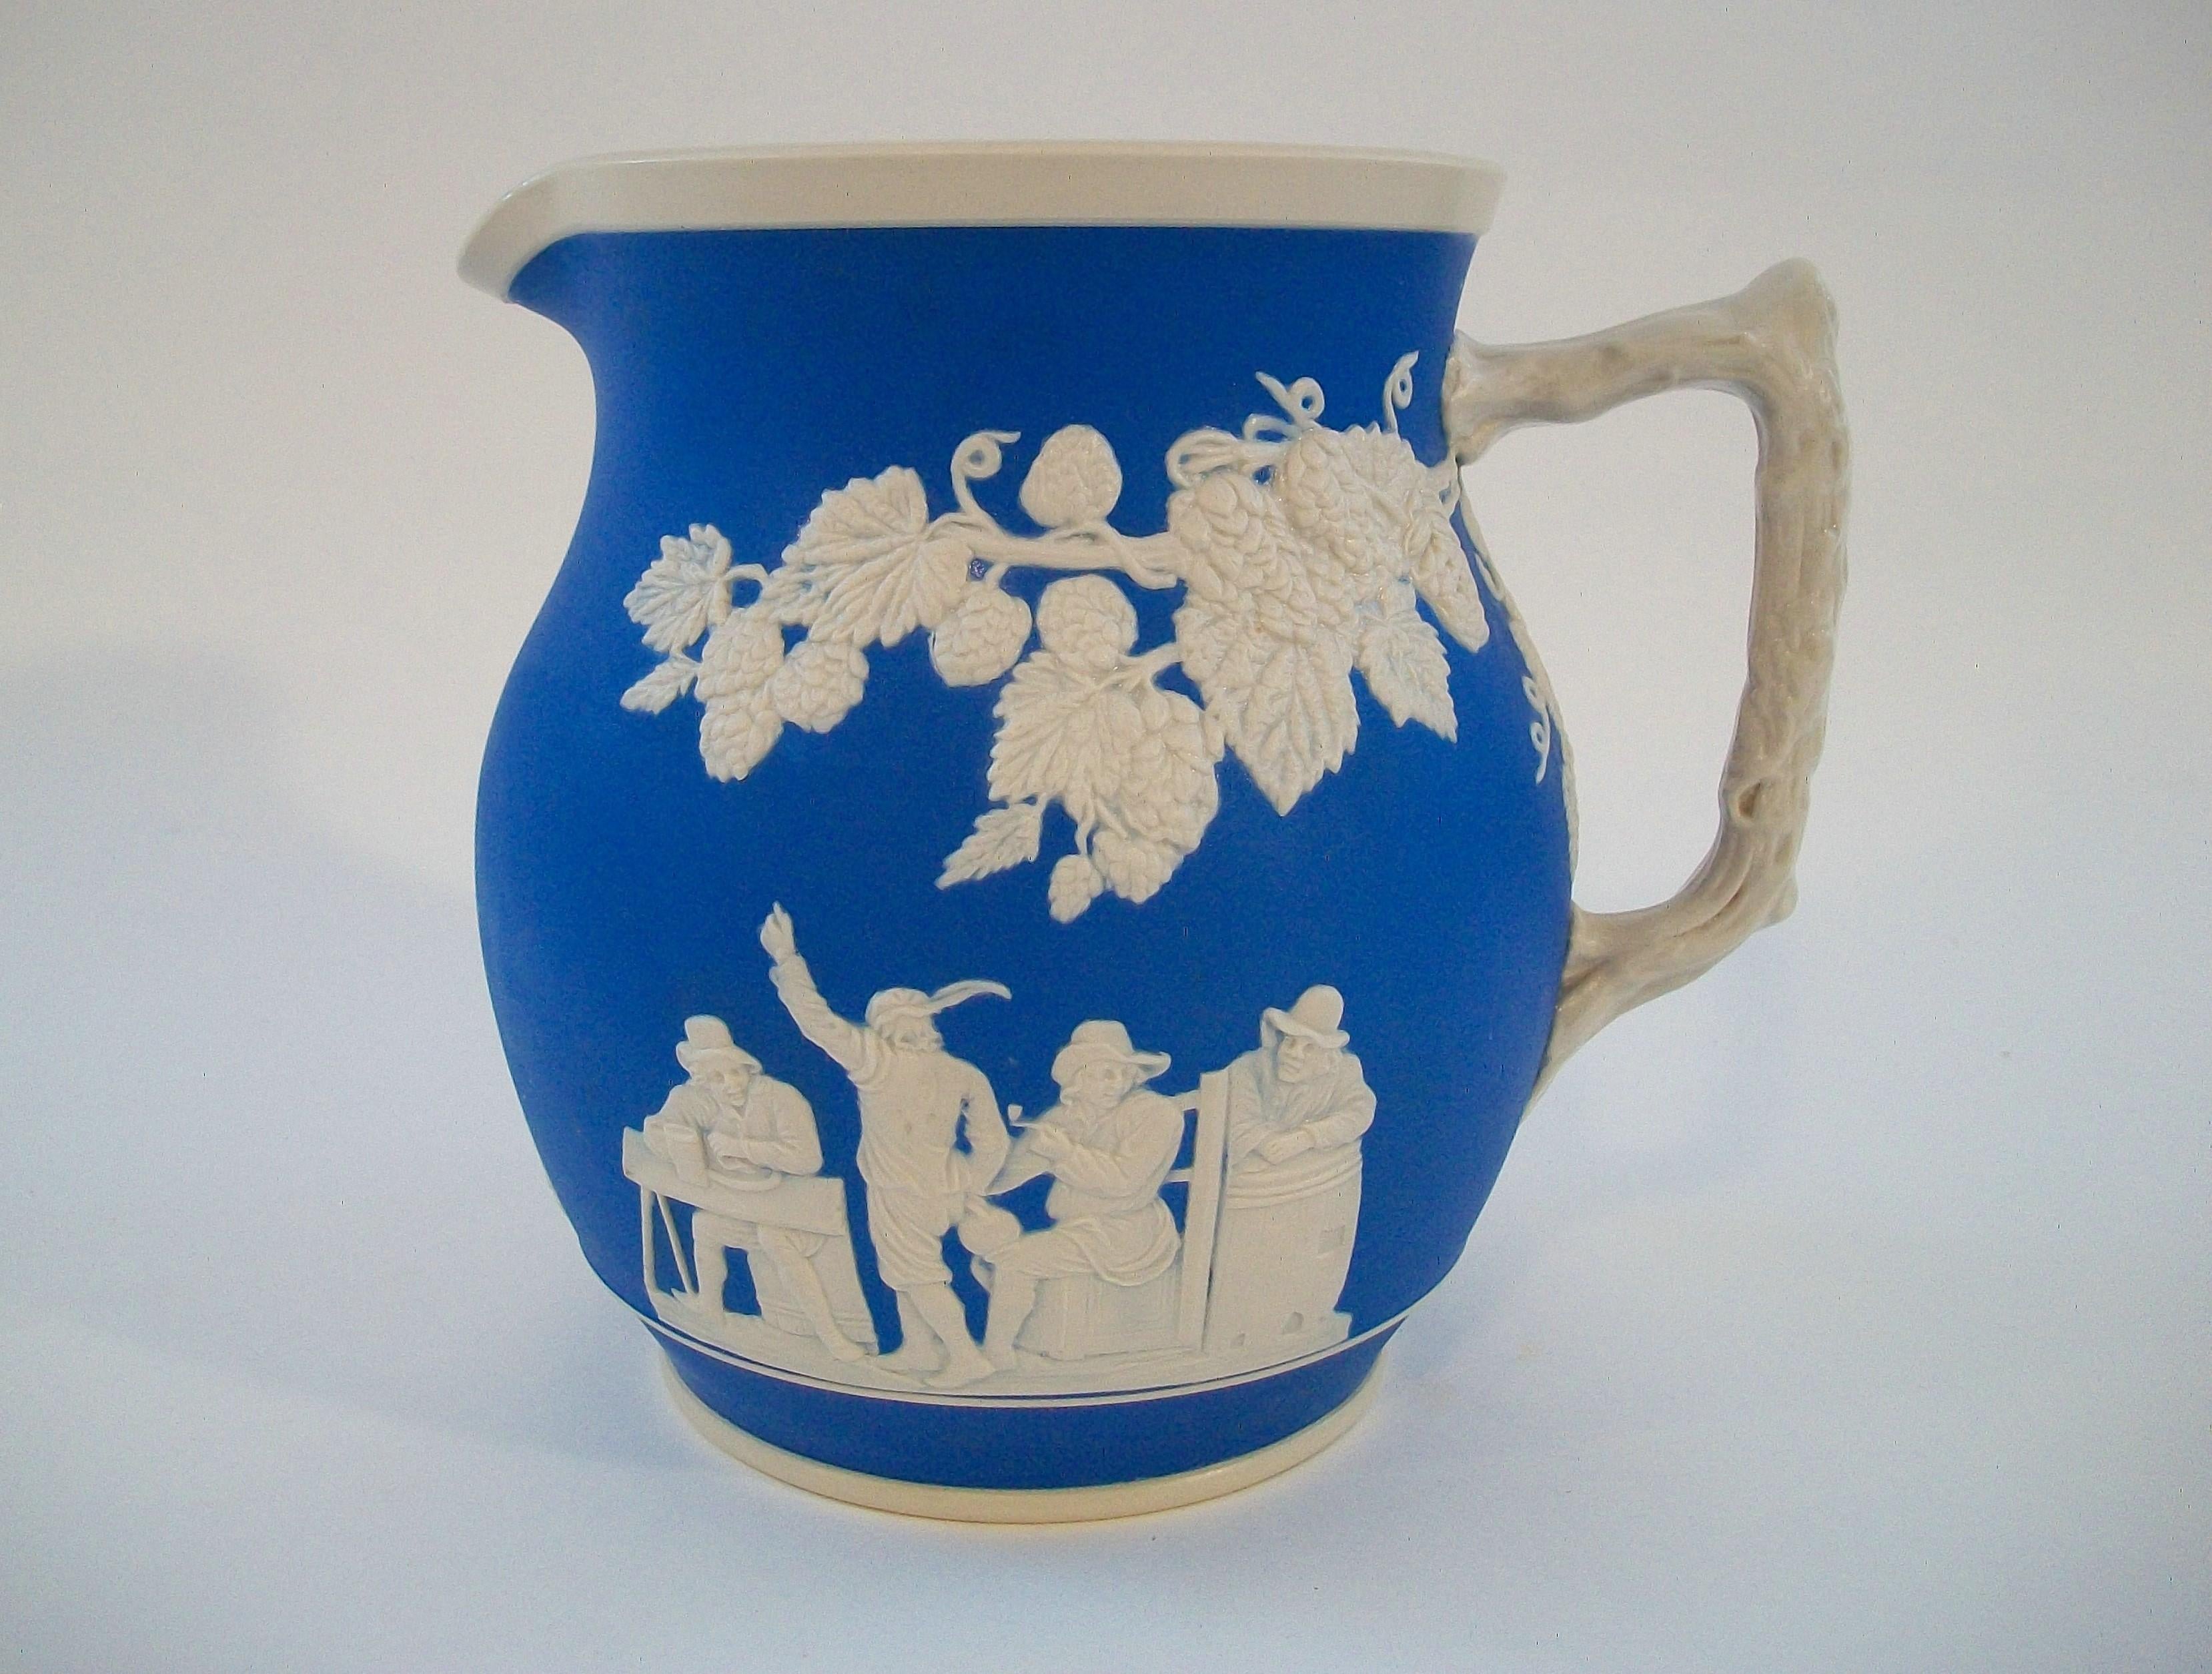 COPELAND SPODE - Rare early antique blue and cream jasperware pitcher - large size - featuring a twig style handle with applied raspberry vines with fruit and leaves to the neck - three appliques of merry makers to the body - glazed interior -